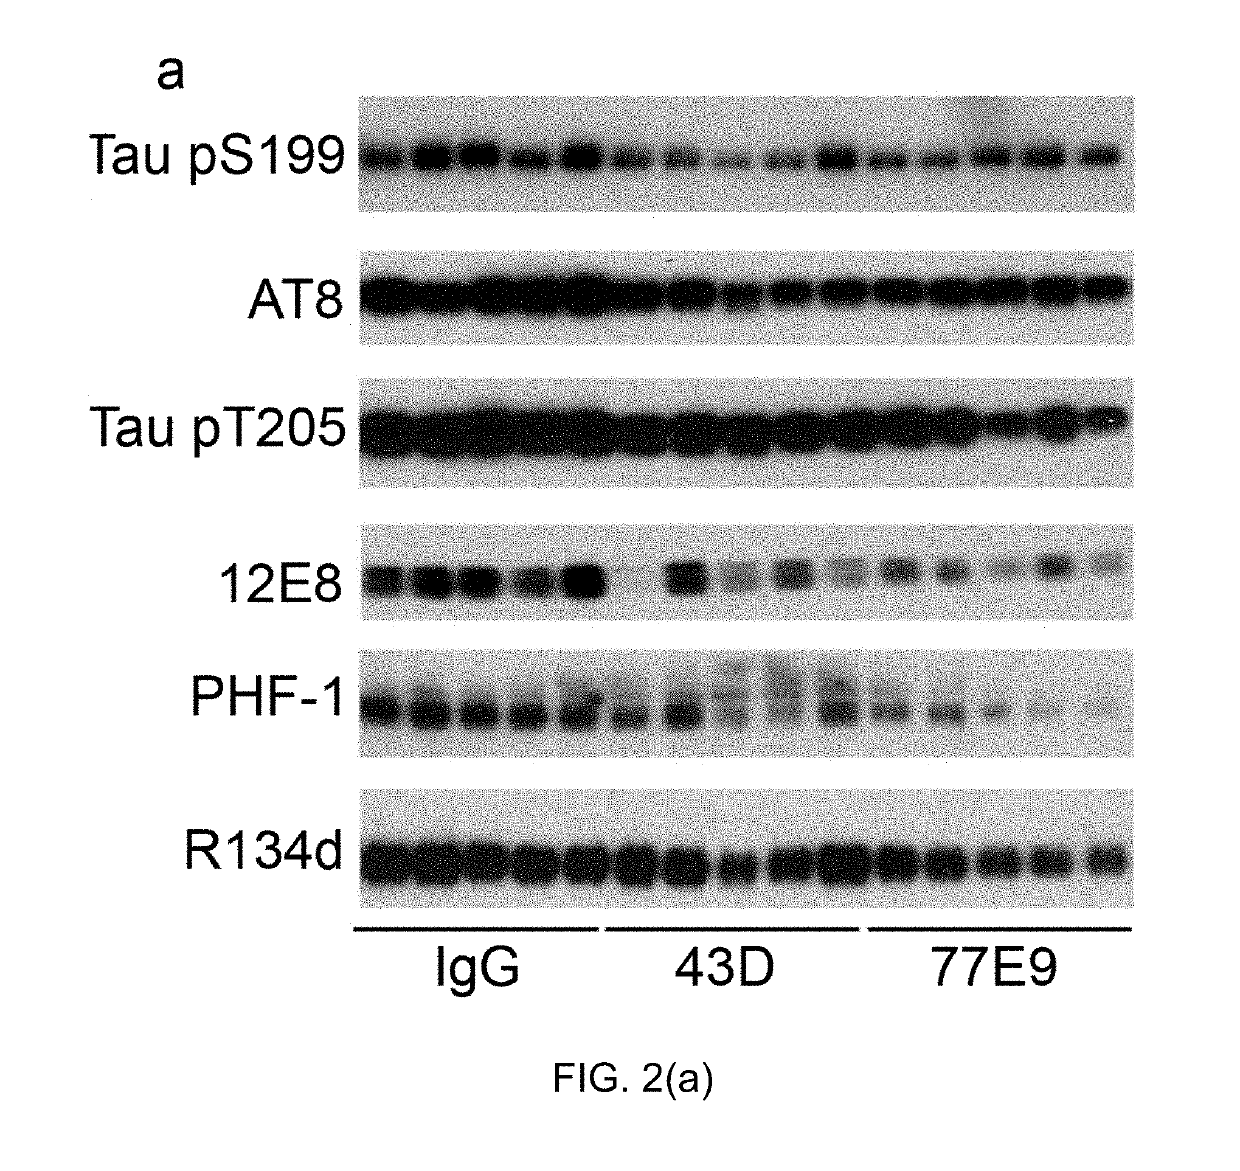 Treatment of tauopathies by passive immunization targeting the N-terminal projection domain of tau